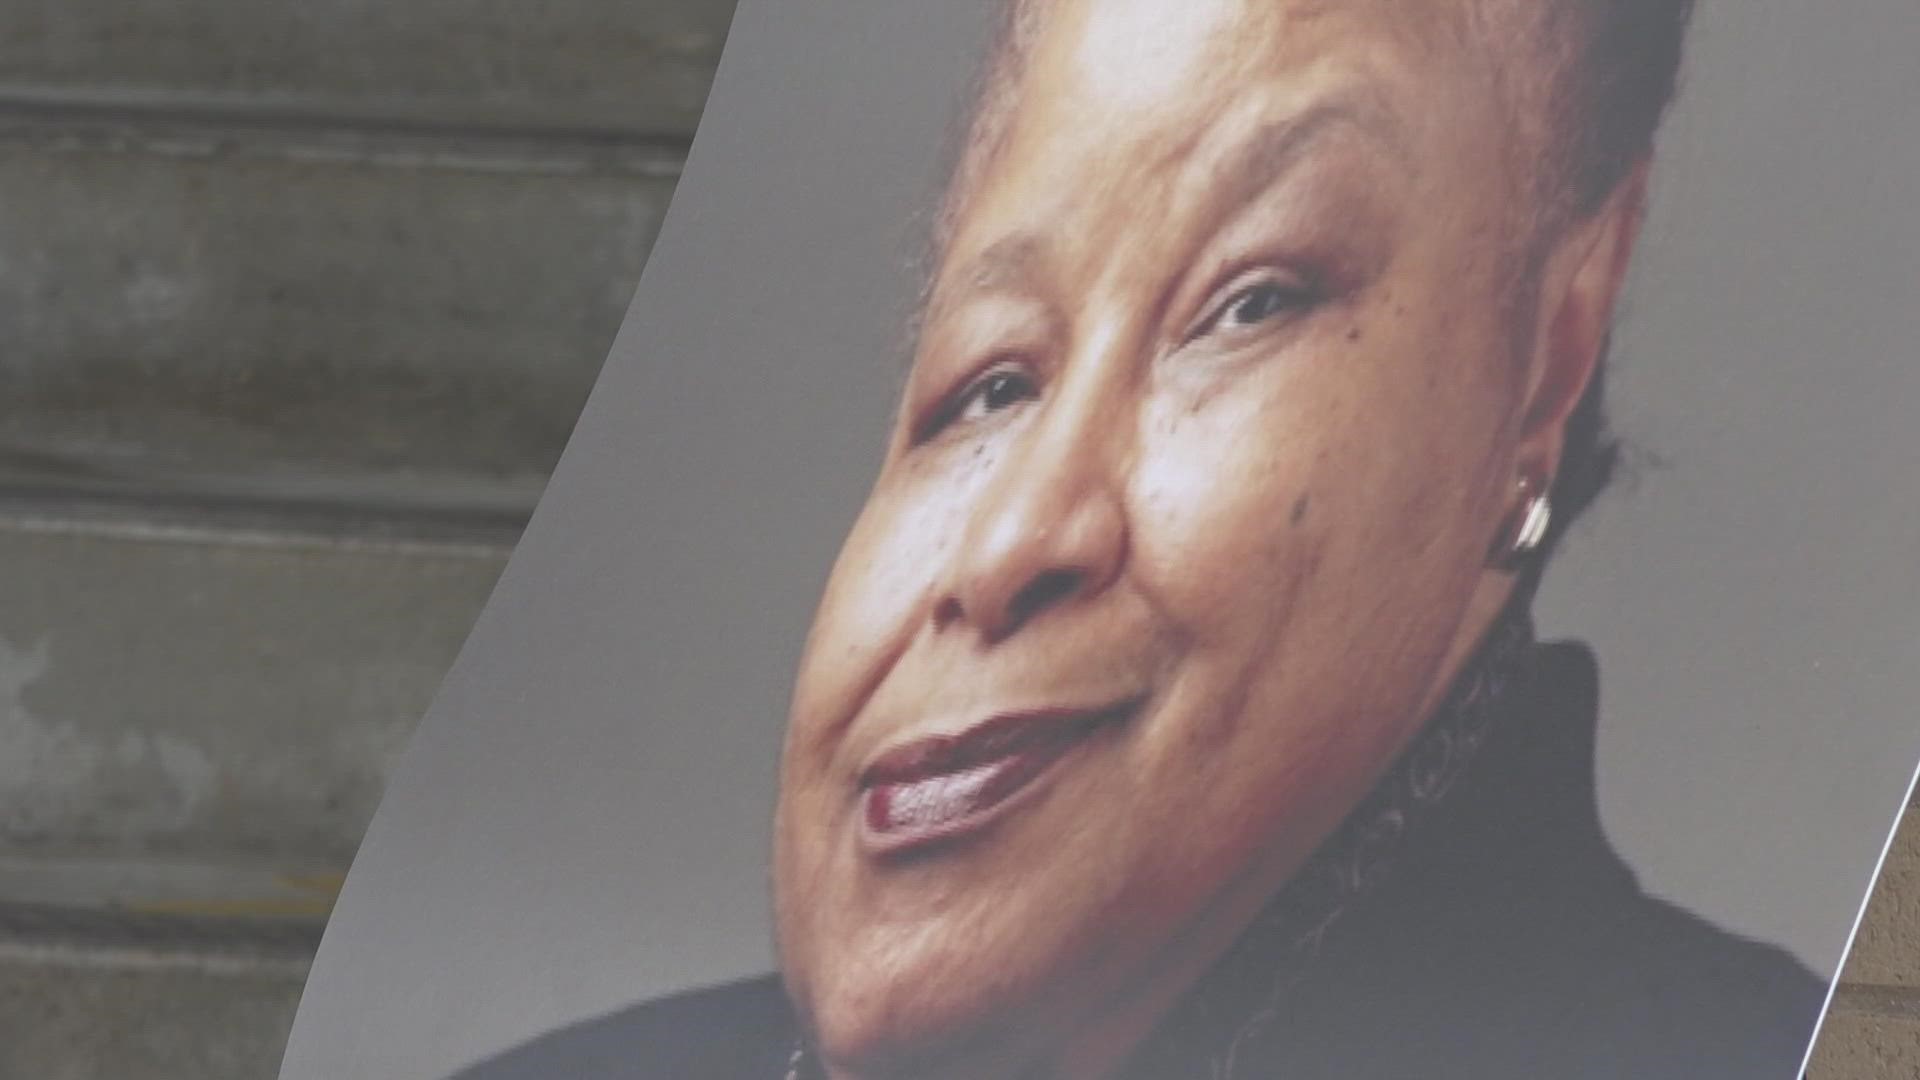 The City of Greensboro renamed a street in honor of late Guilford County Commissioner Carolyn Coleman